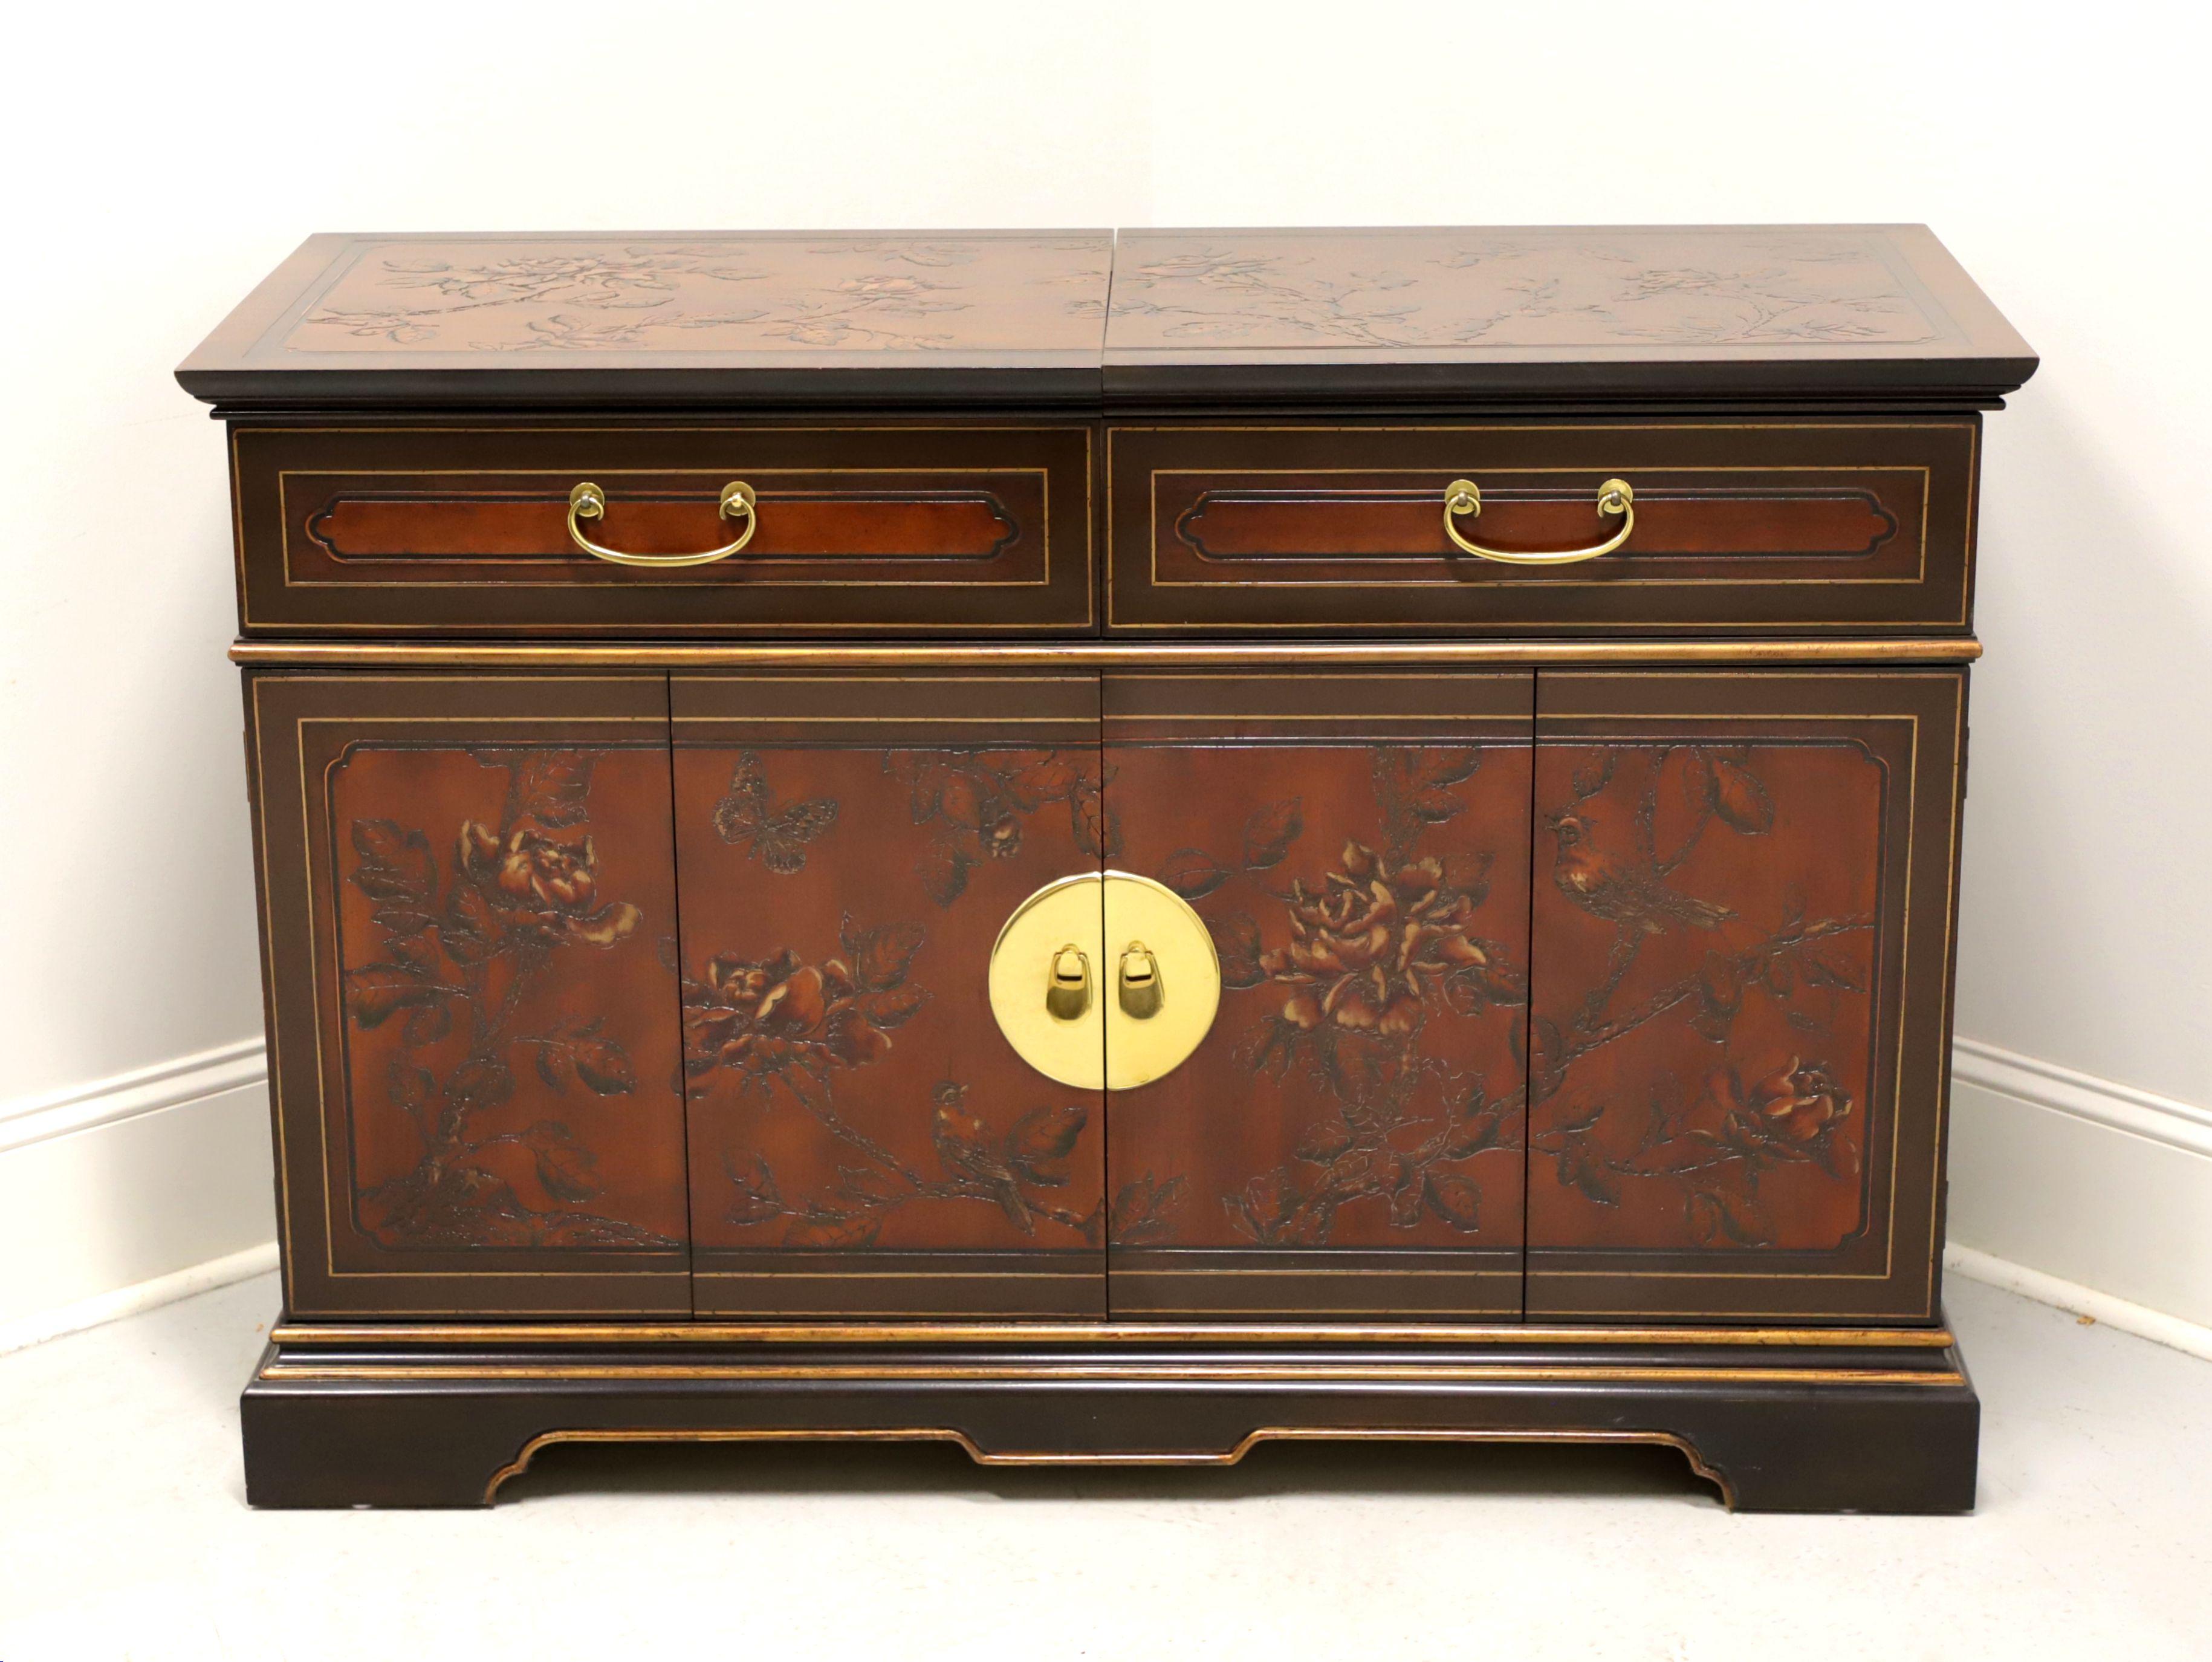 An Asian inspired server by Drexel Heritage. Highly polished hardwood & veneers with carved Chinoiserie scenes to top, sides & door fronts, brass hardware, hard composite surface under slide out banded top and bracket feet. Features the slide out